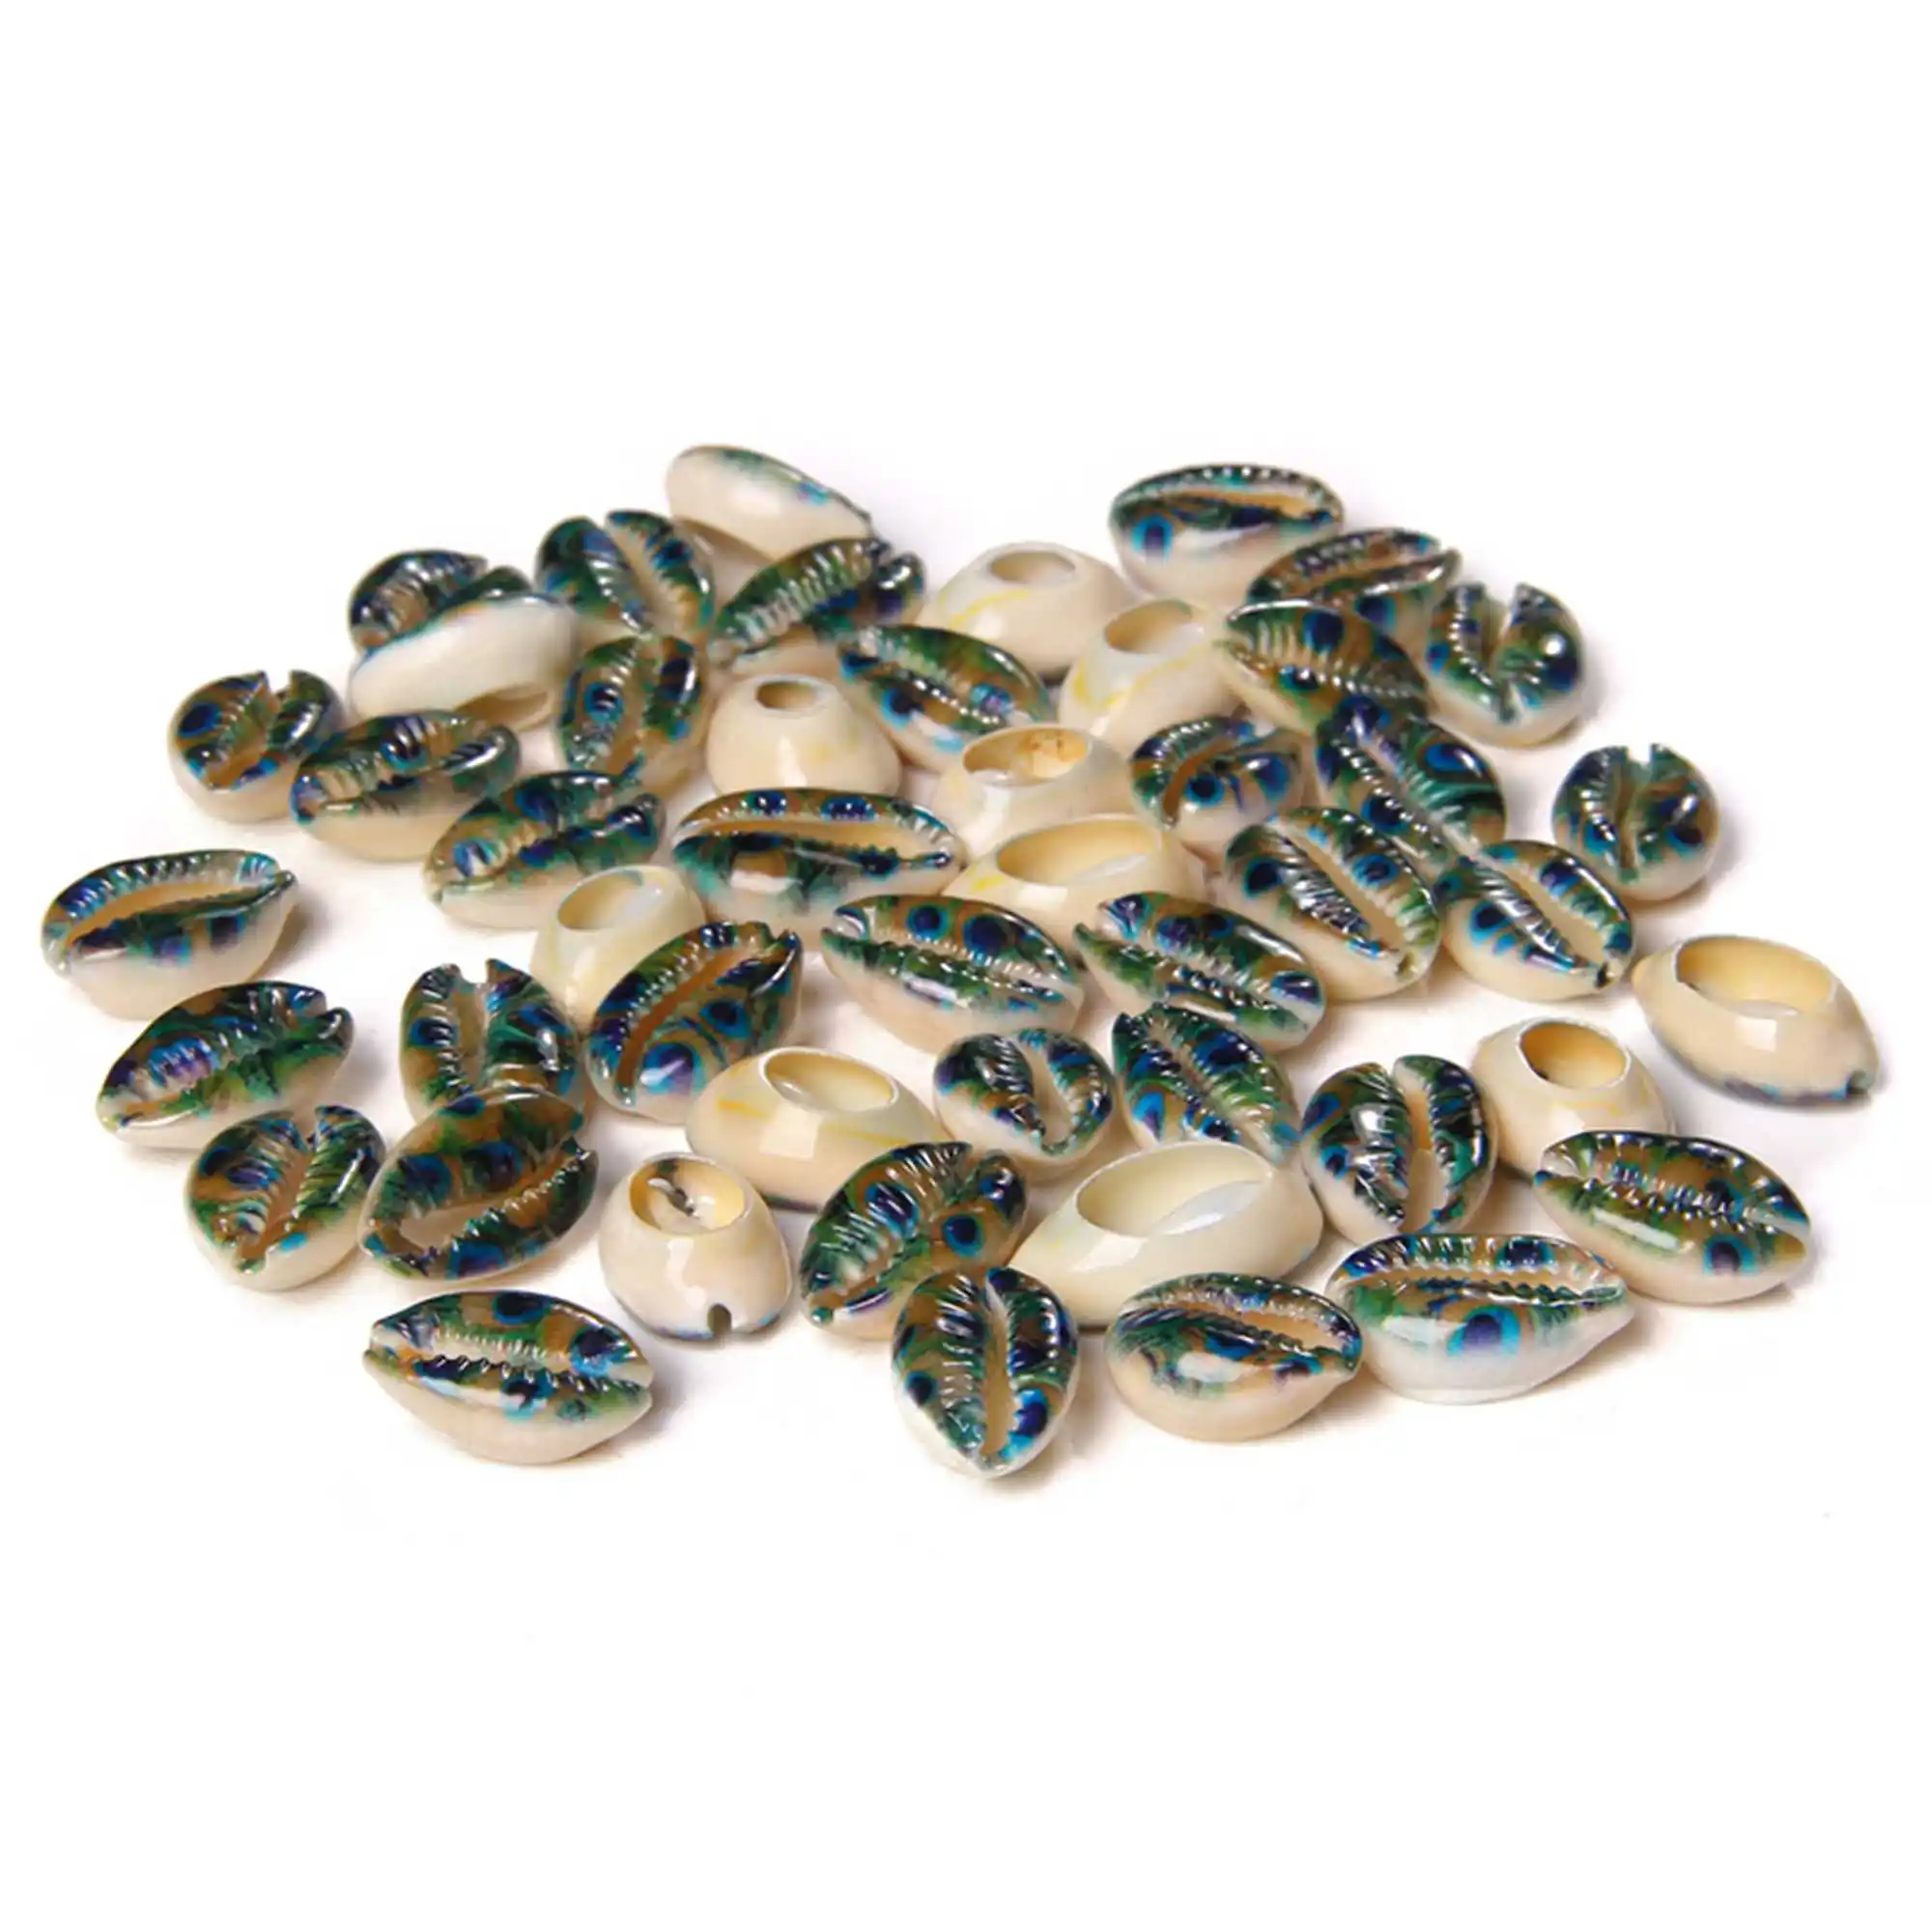 

Rainbow Sea Shell Beads Pendants Wholesale 20/30 pcs White Conch Painting Cowries Charm Jewelry Findings DIY Necklace Earrings